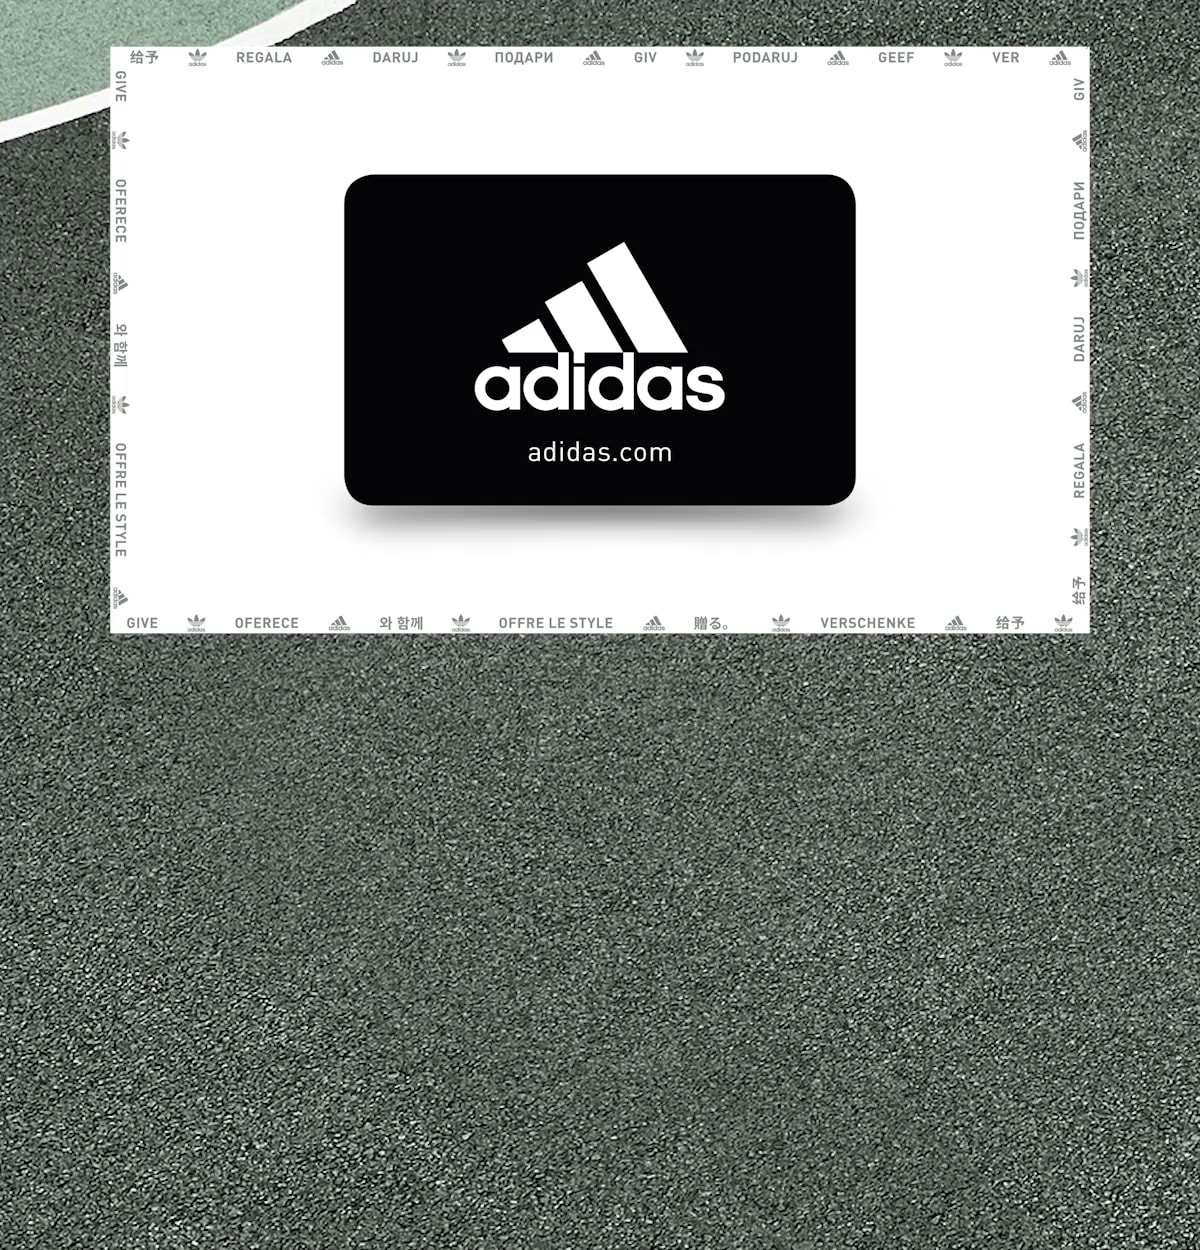 Gift cards | adidas UK | The perfect 